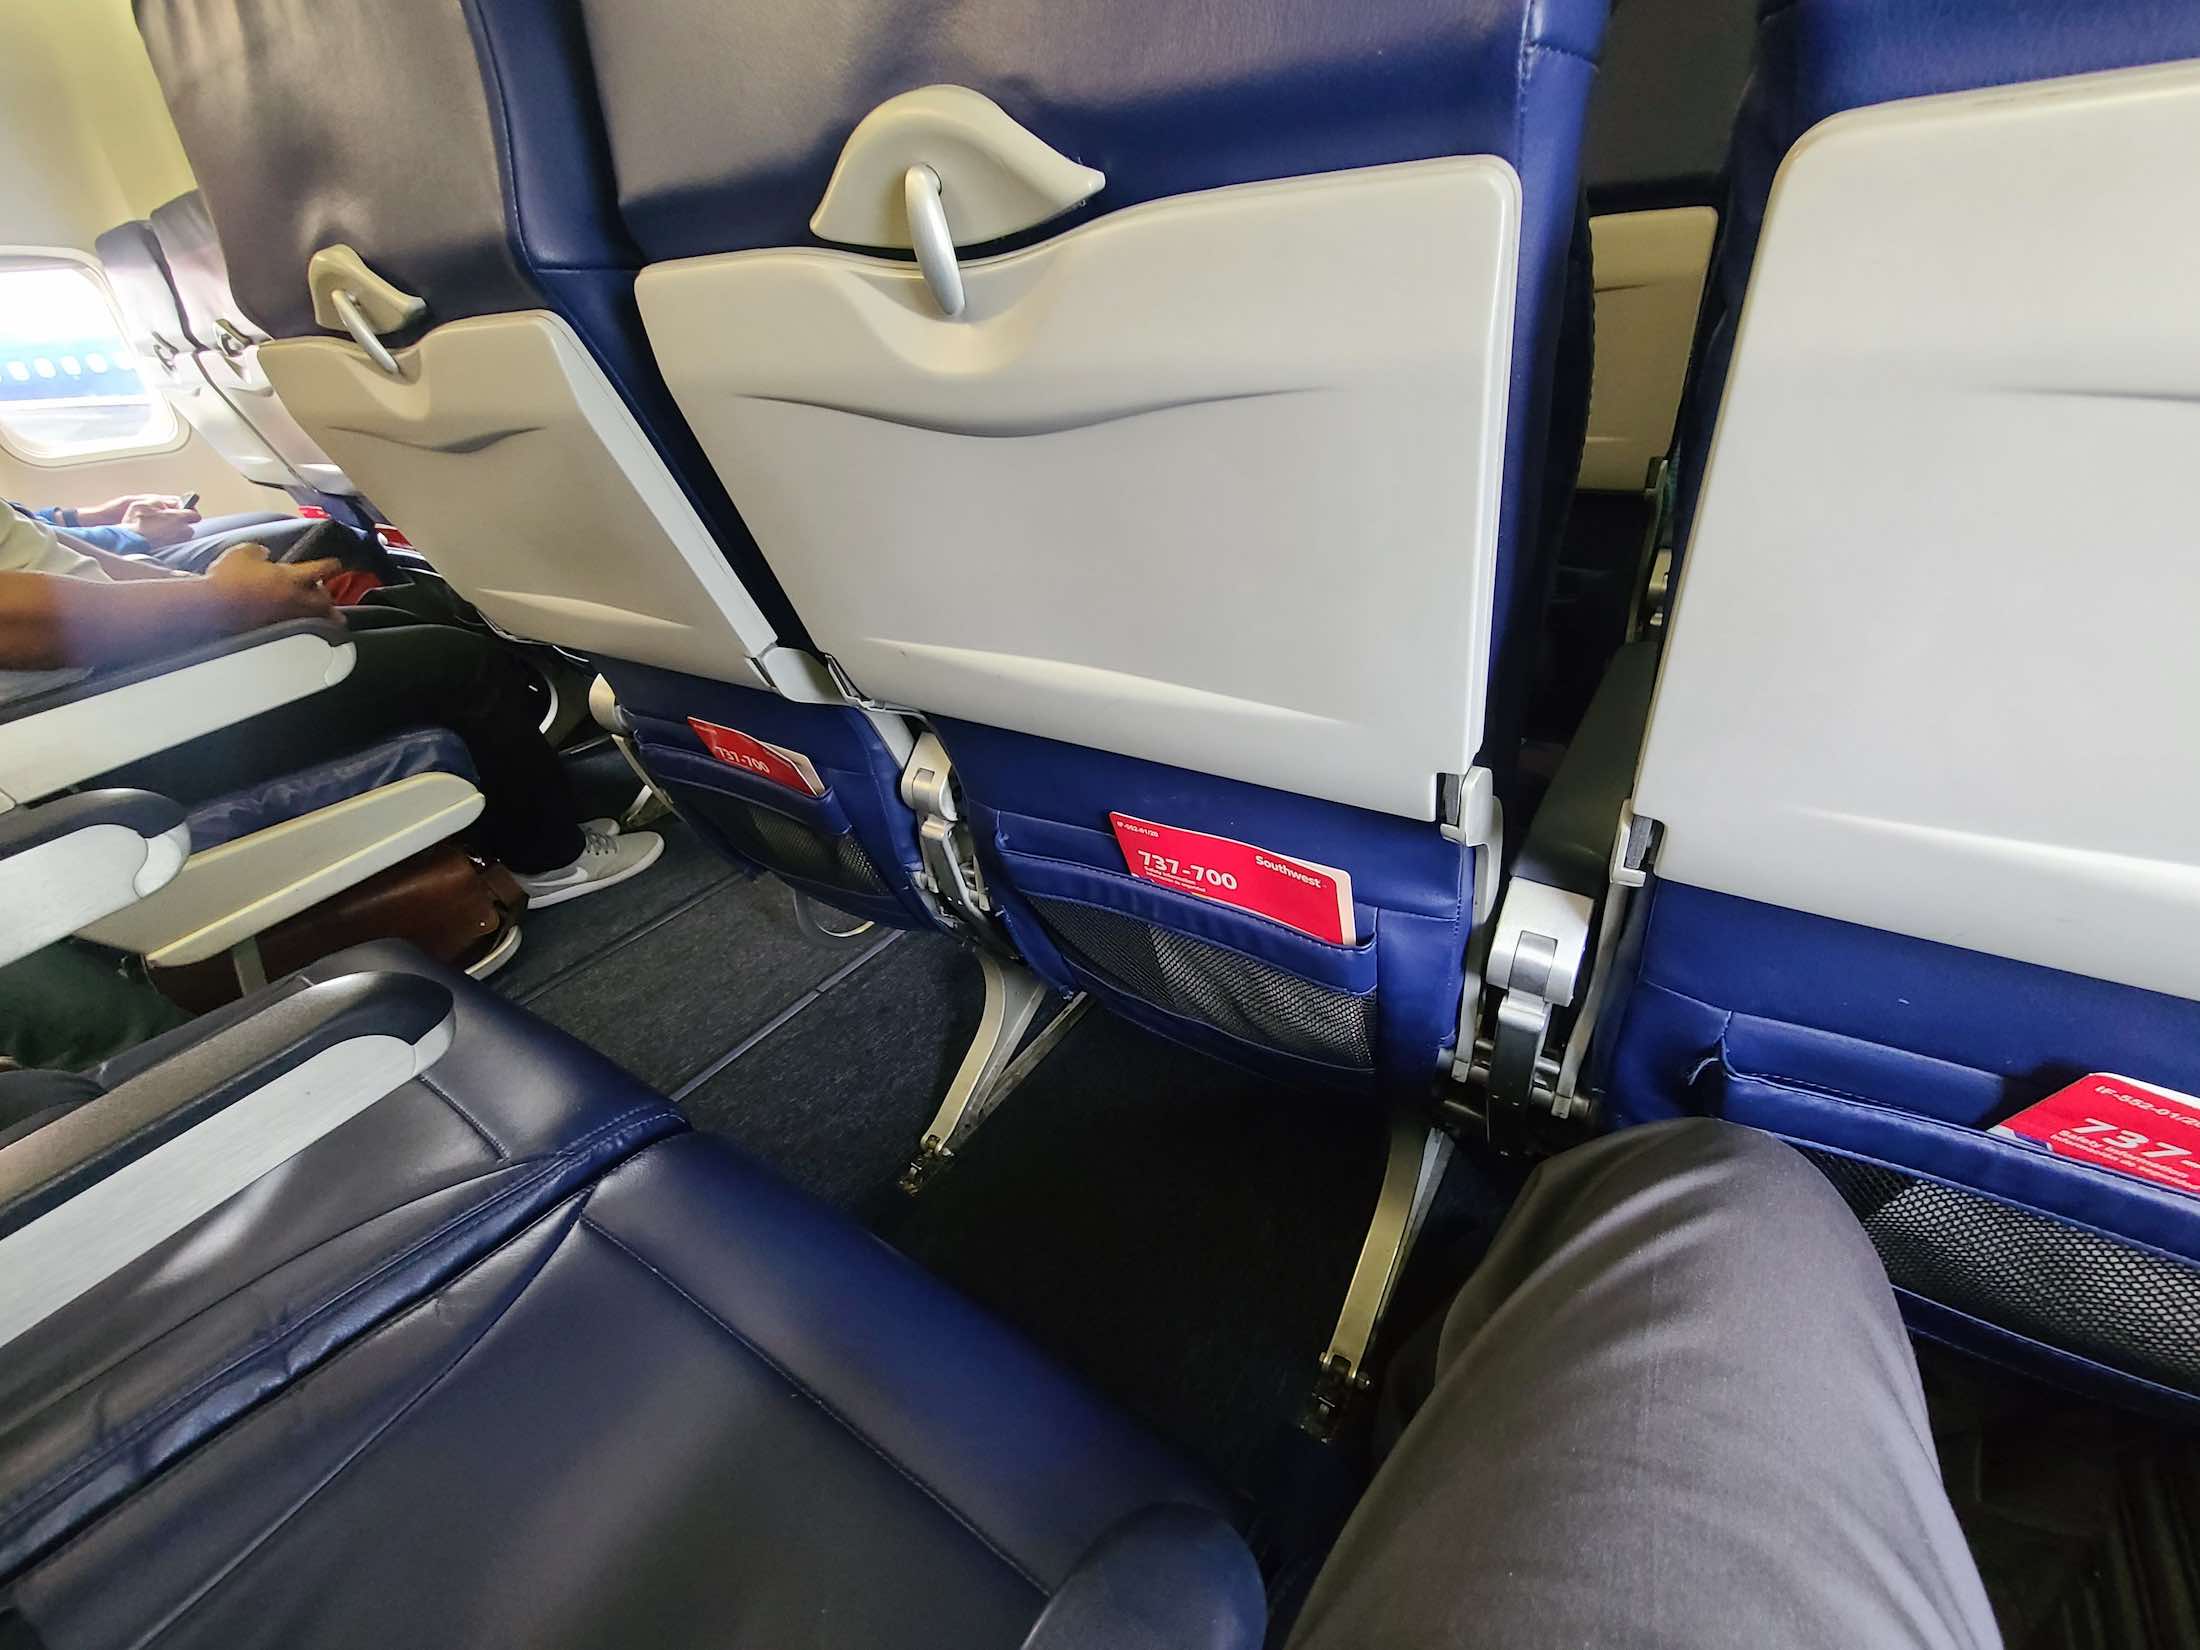 seats in an airplane with a seat